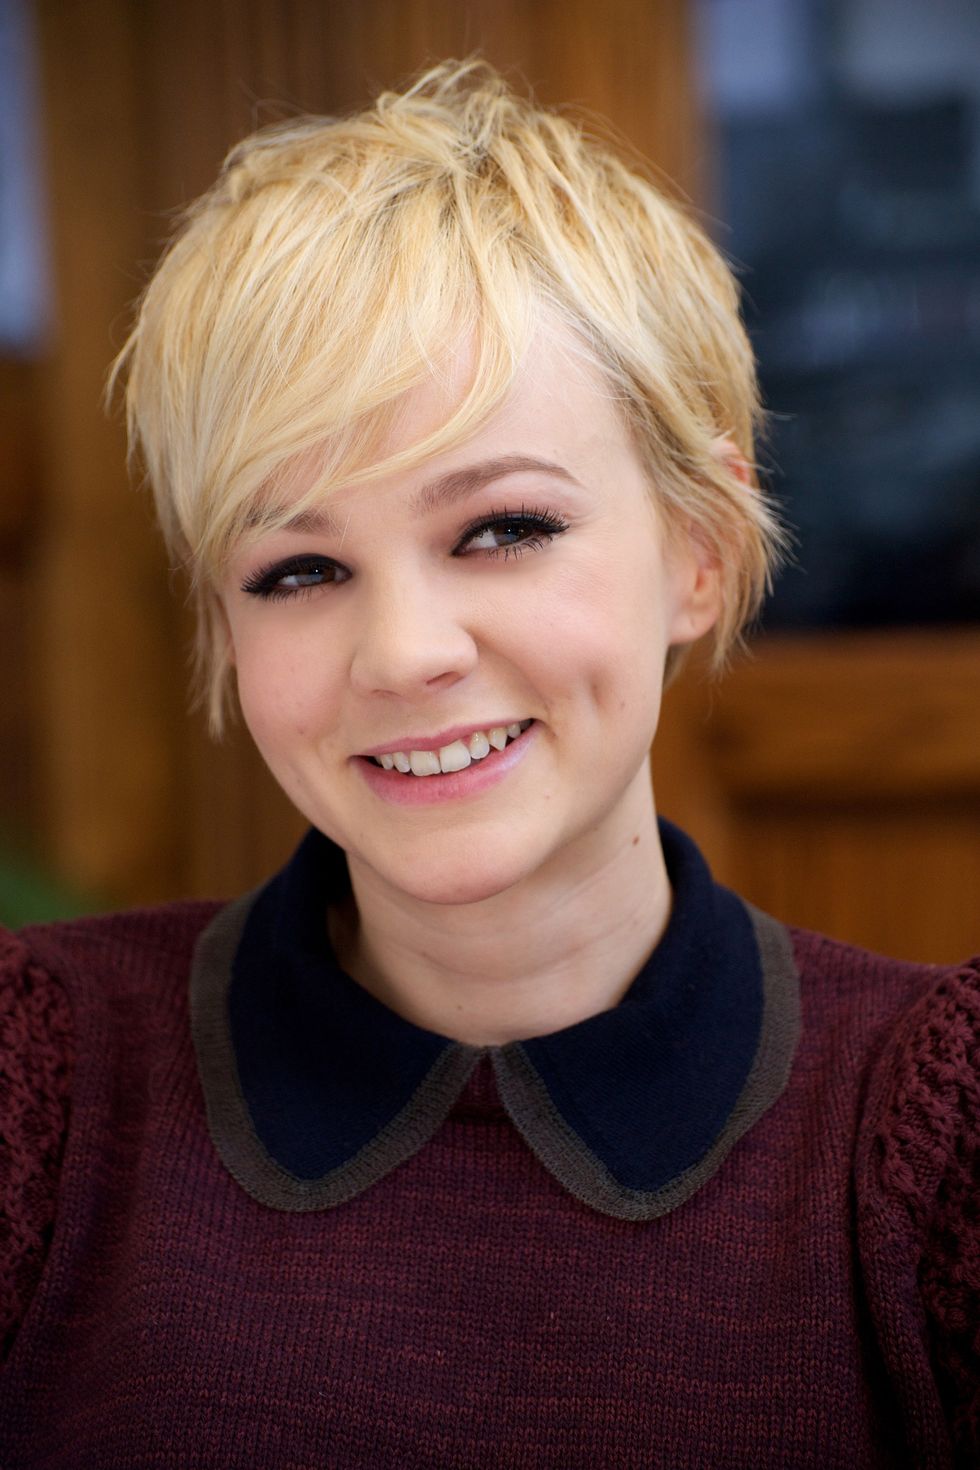 Cute Ways to Wear a Pixie Cut with Bangs, by She look book